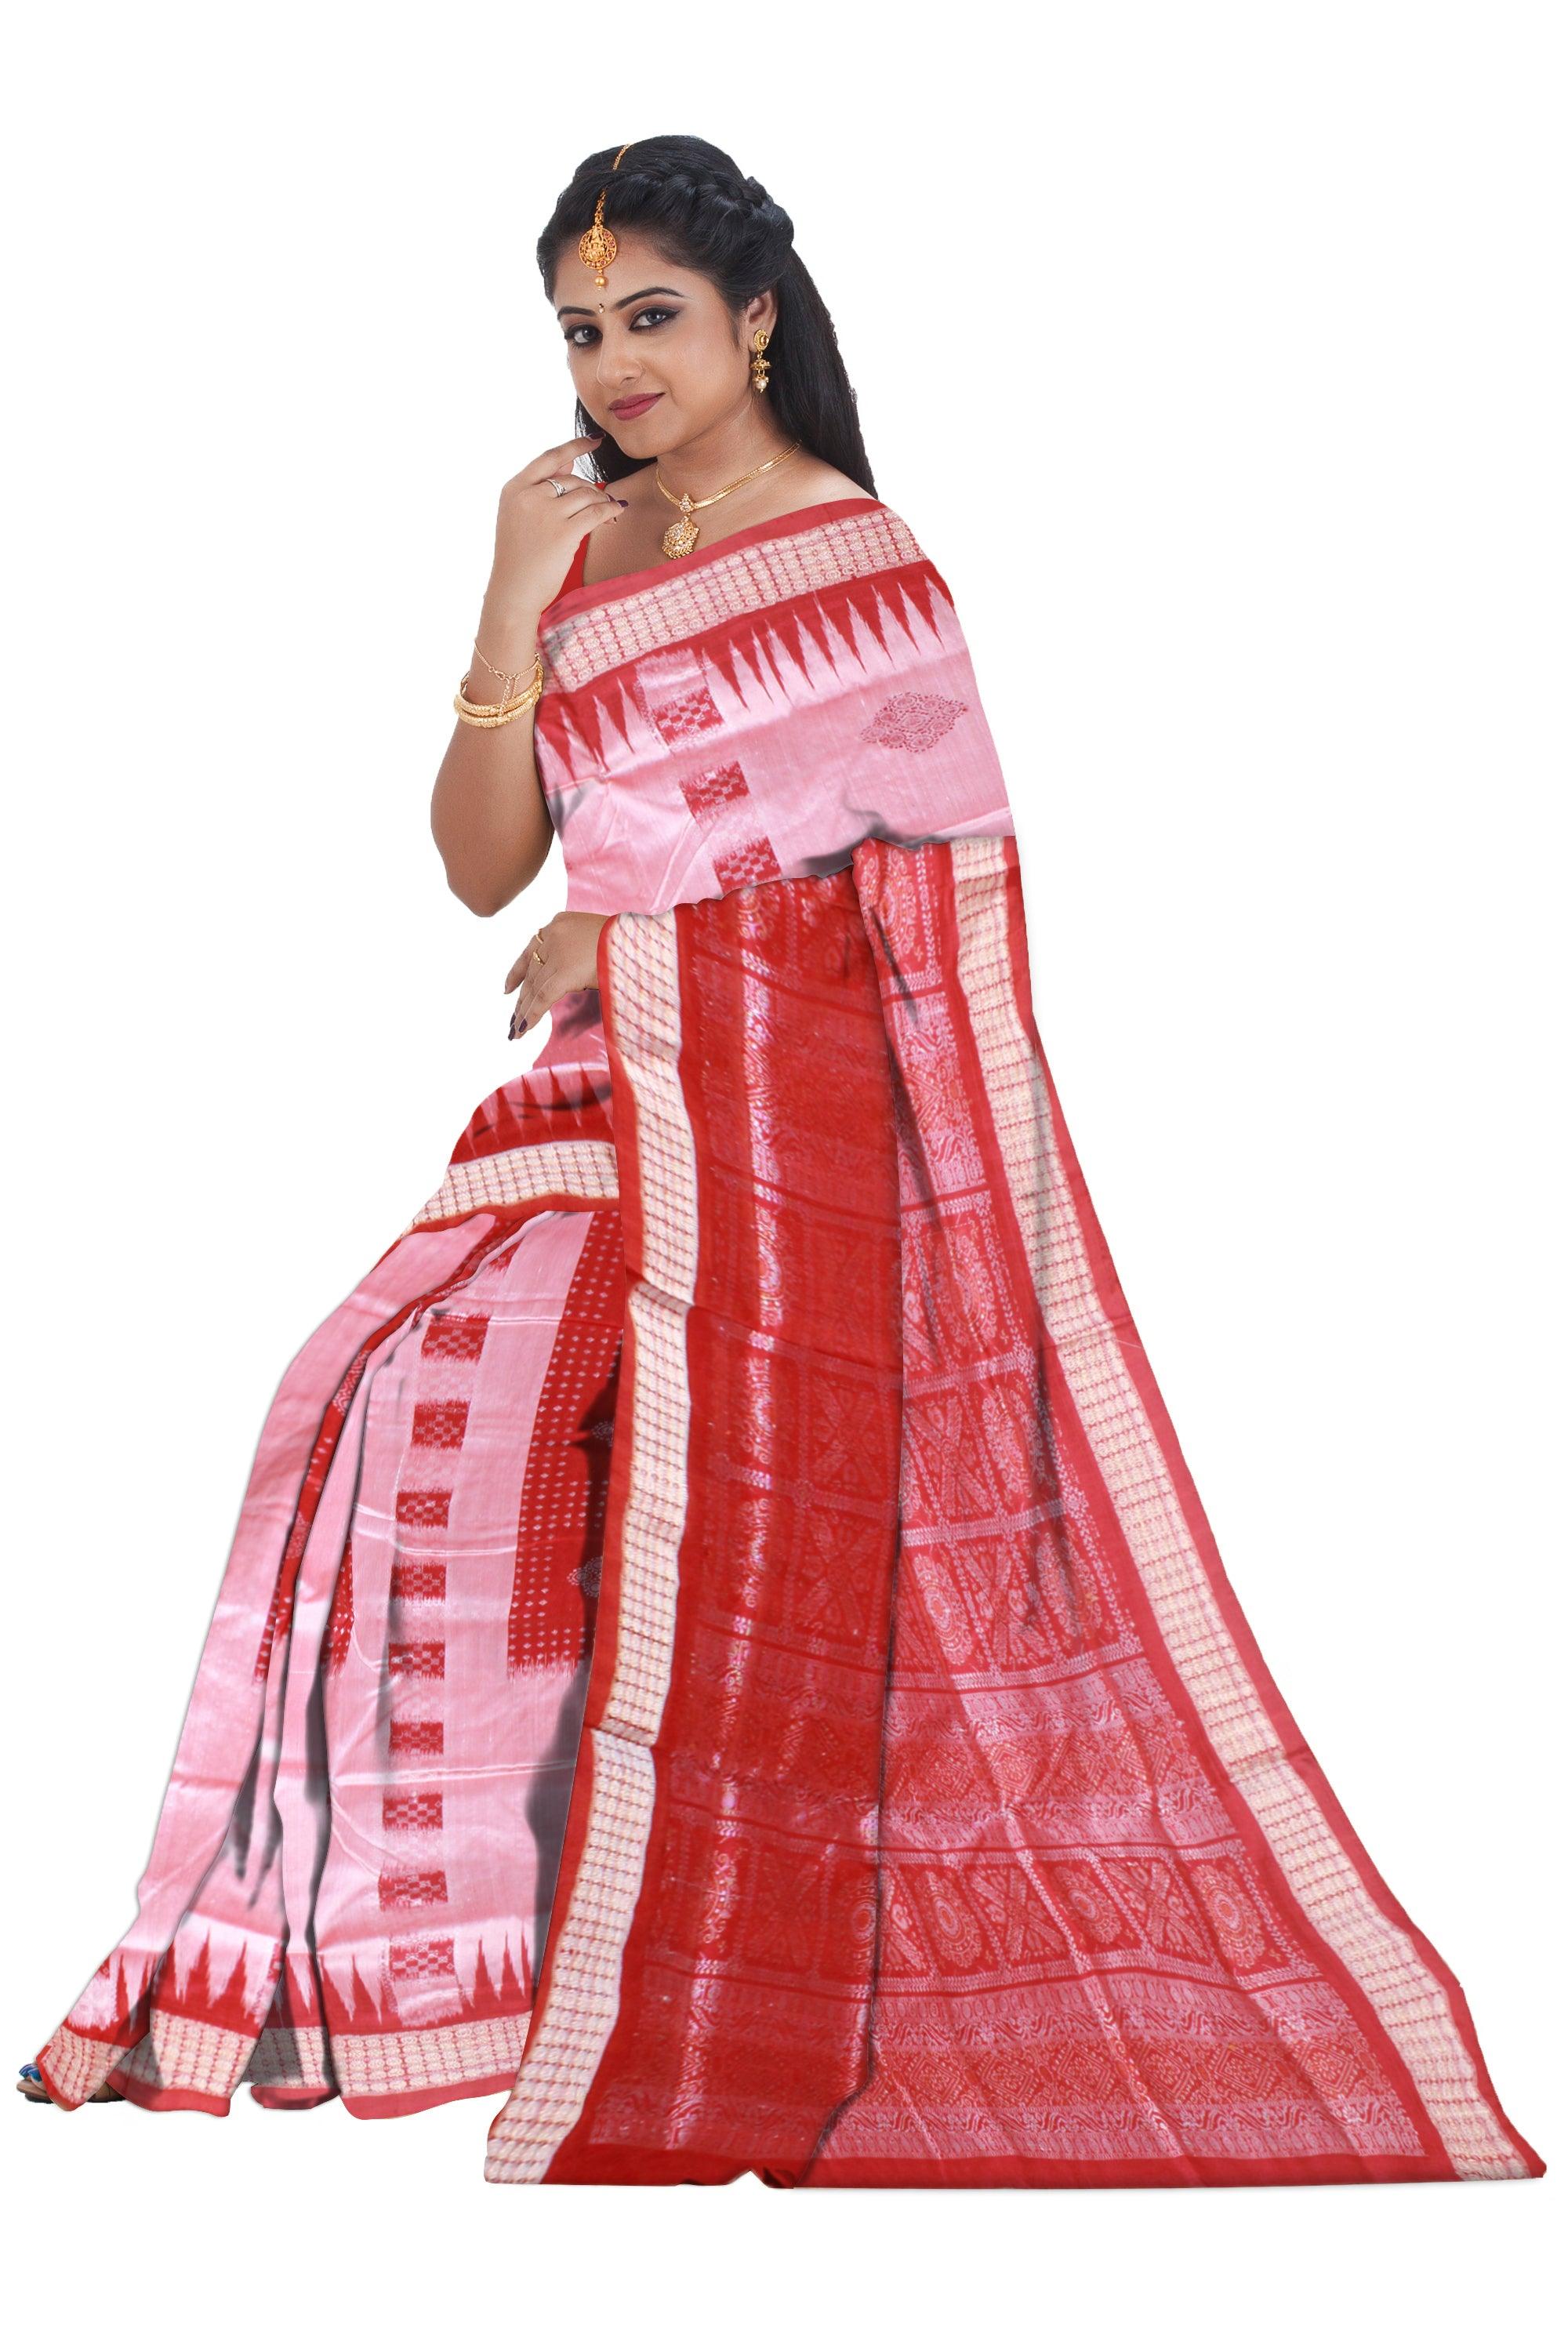 NEW COLLECTION CHANDUA PATA SAREE IS RED AND LIGHT SILVER COLOR BASE, WITH BLOUSE PIECE. - Koshali Arts & Crafts Enterprise